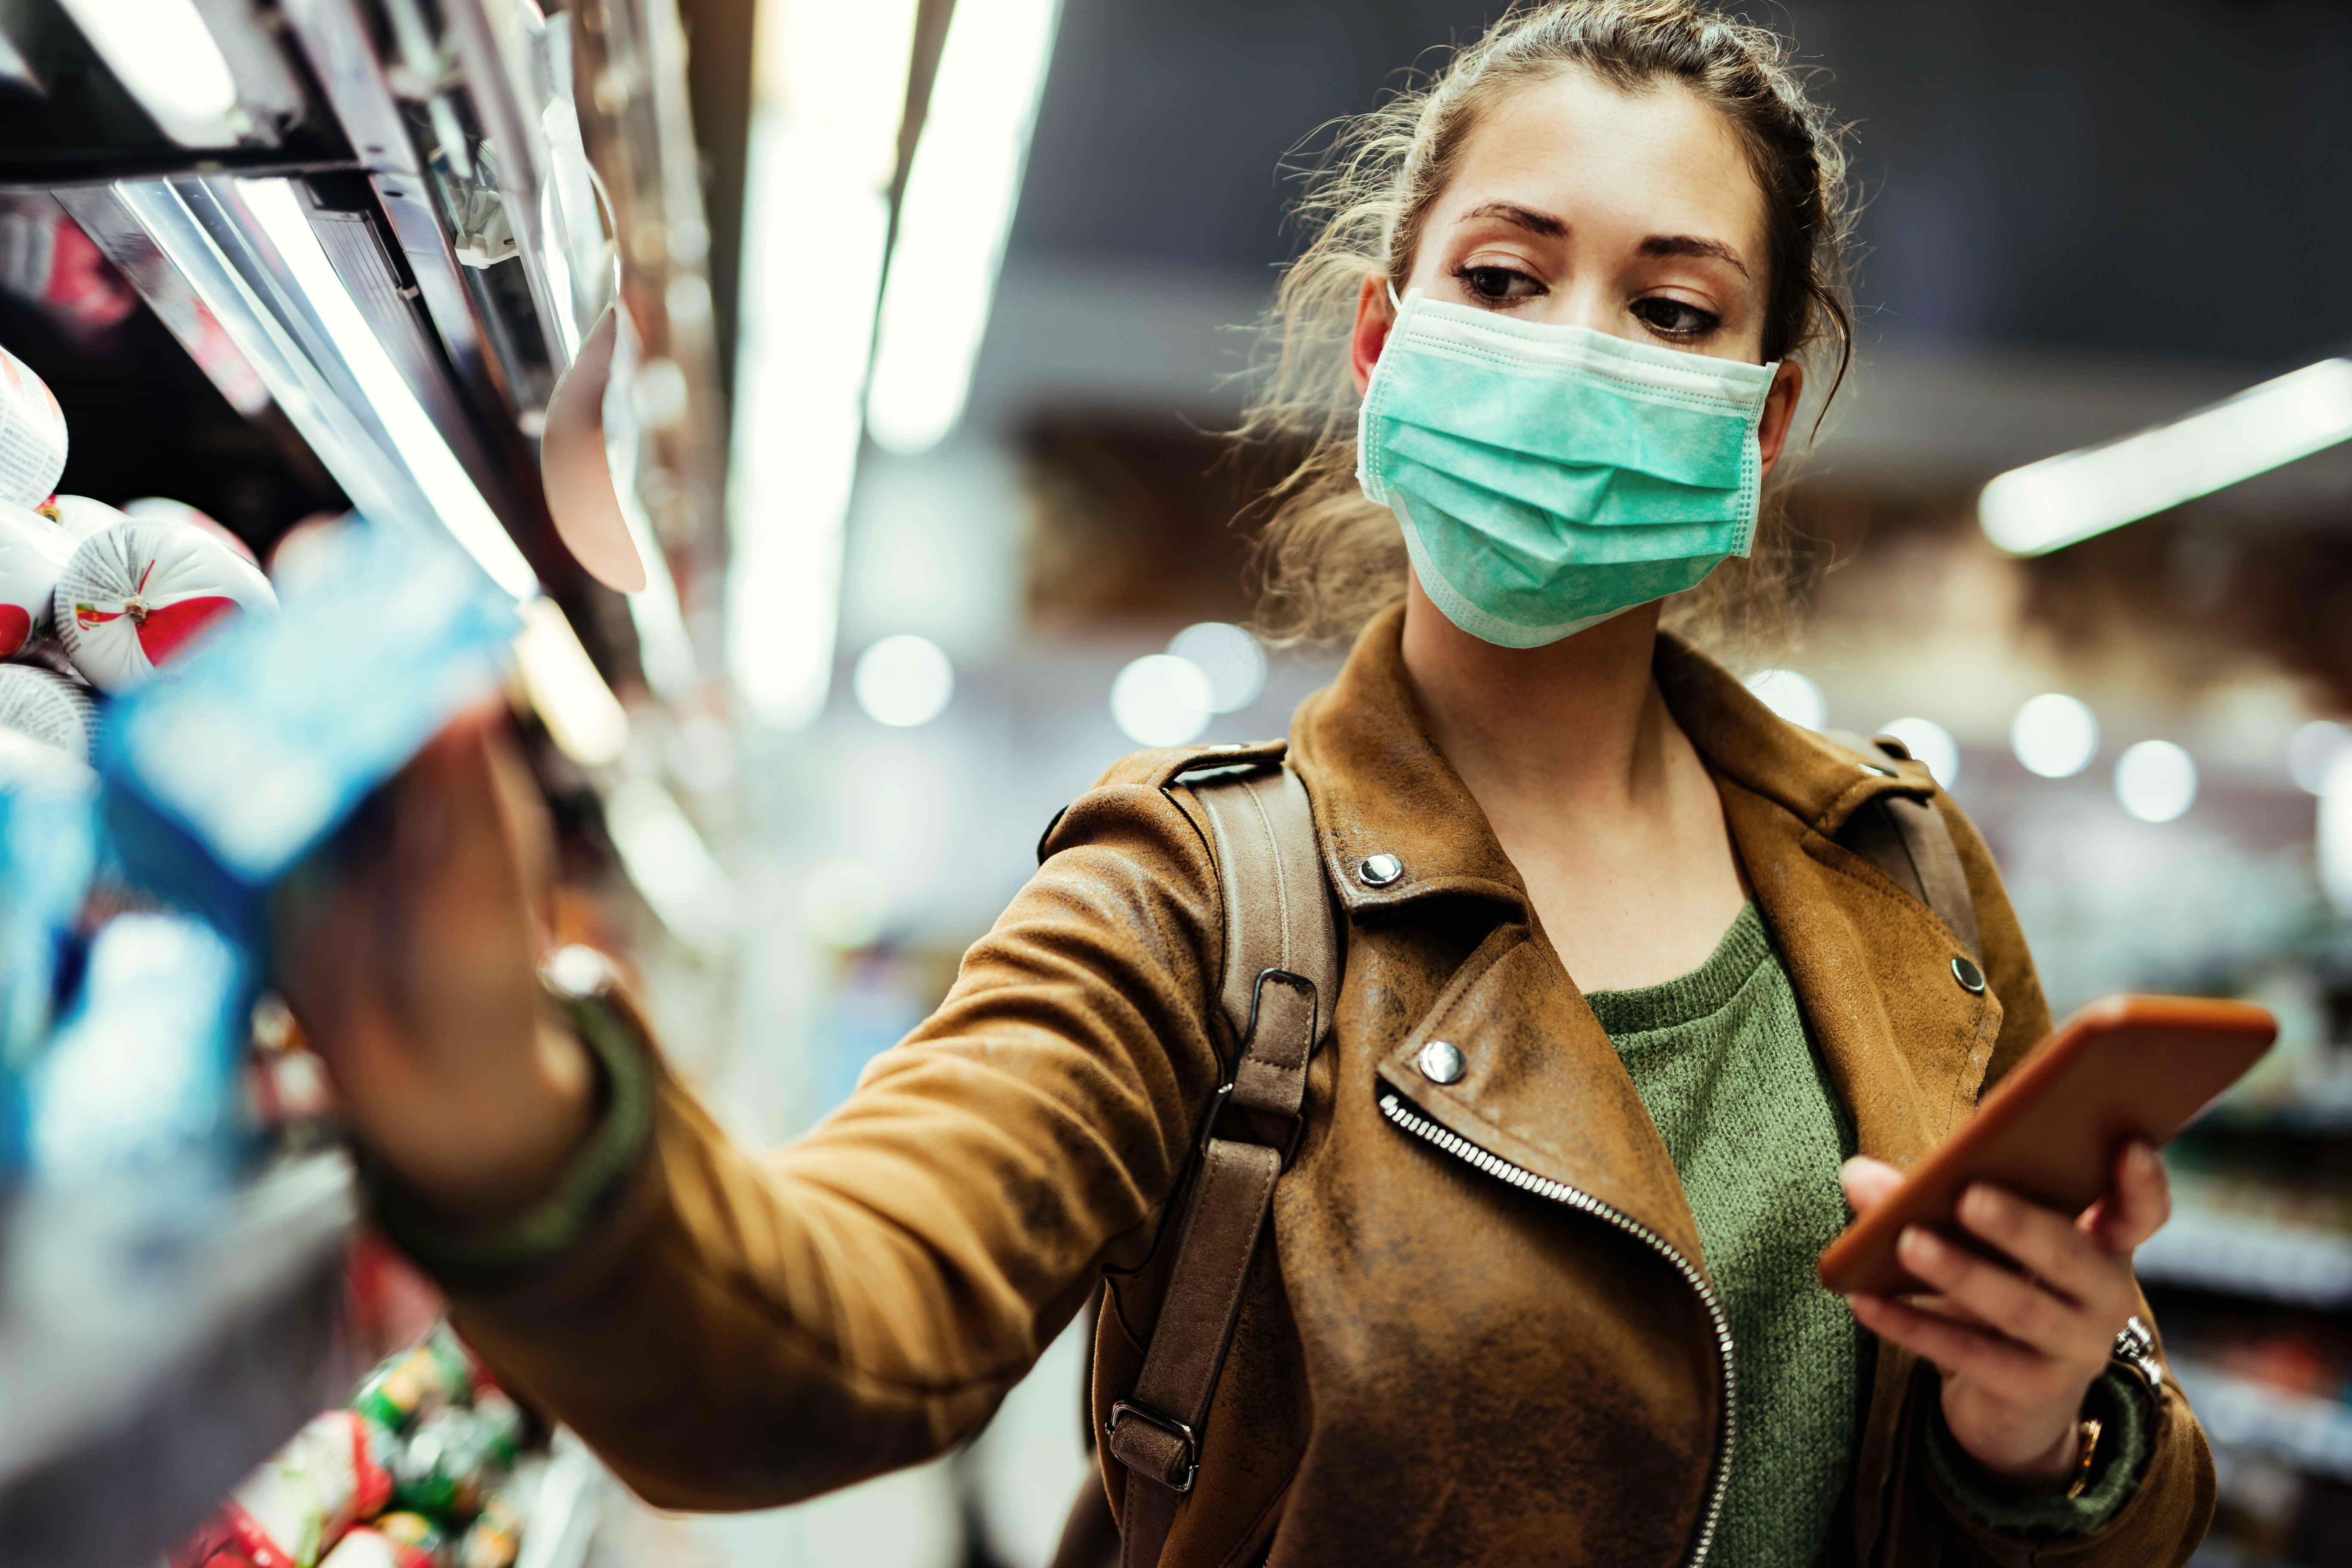 Young woman with face mask using mobile phone and buying groceries in the supermarket during virus pandemic.